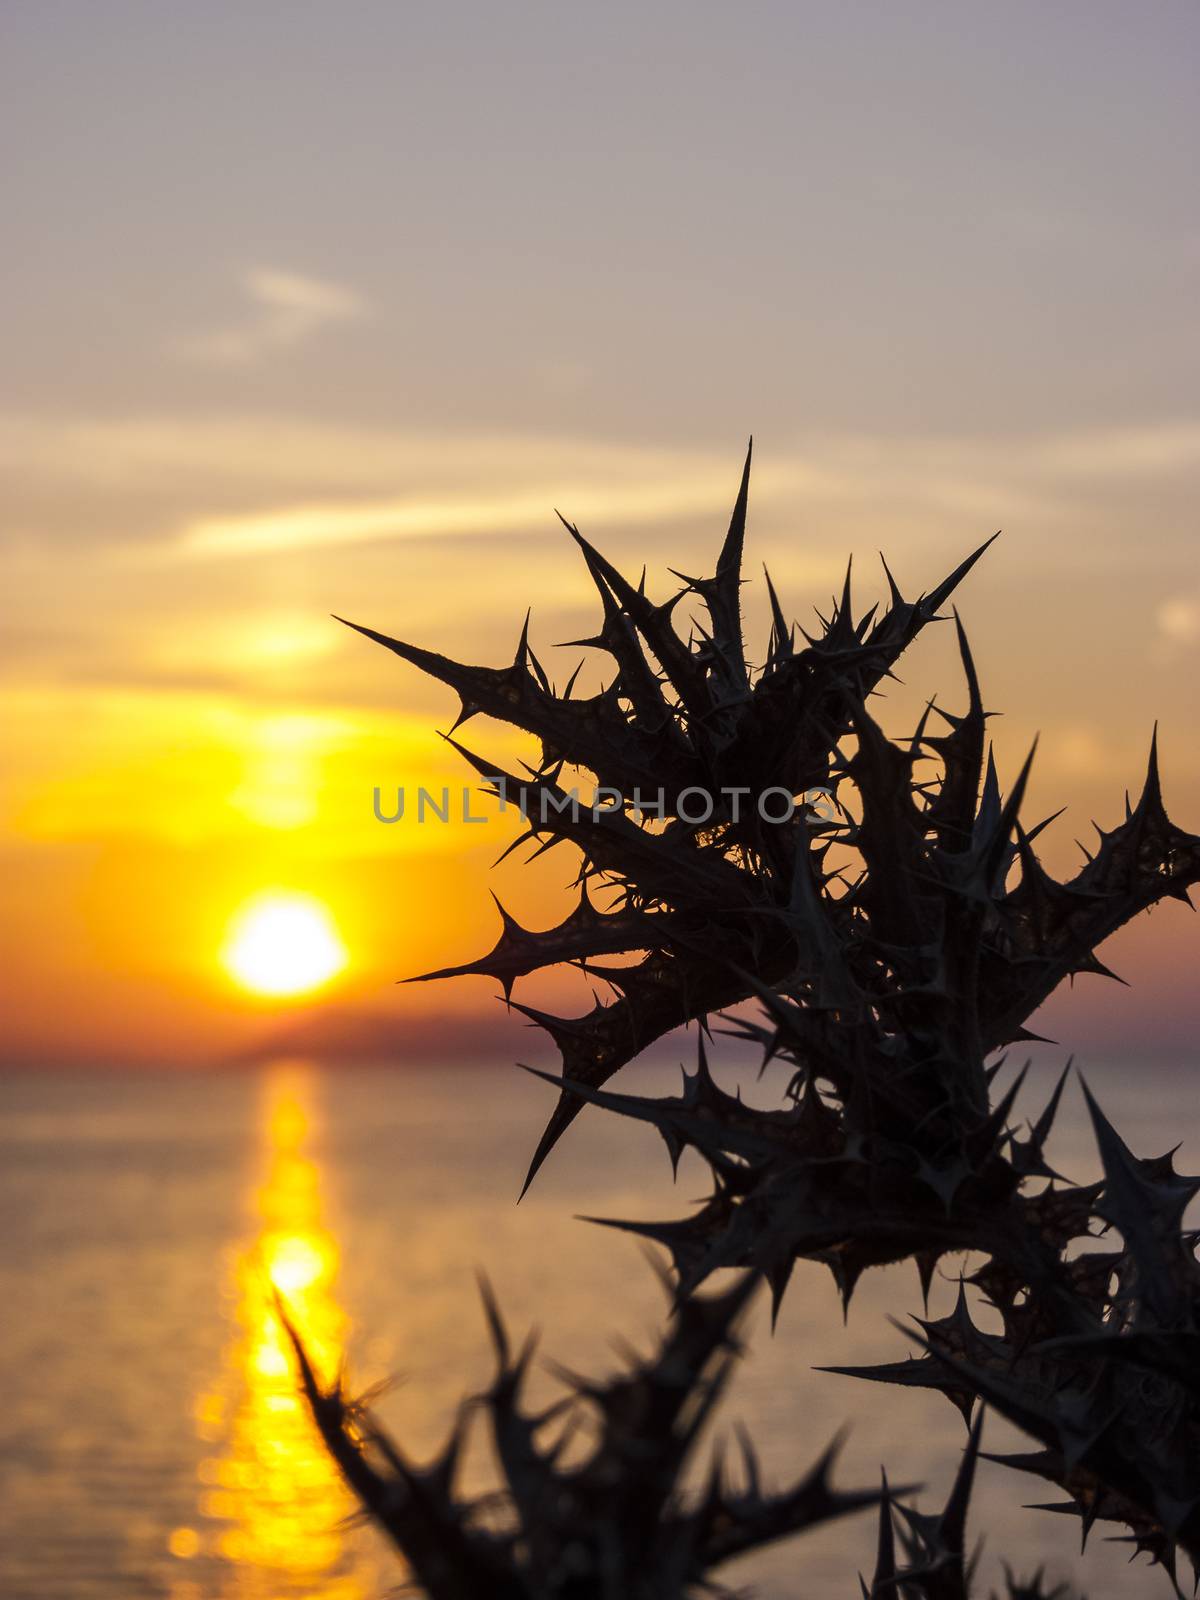 Beautiful sunset at Logas beach at Peroulades village of Corfu island, Greece with thorns plant silhouette.